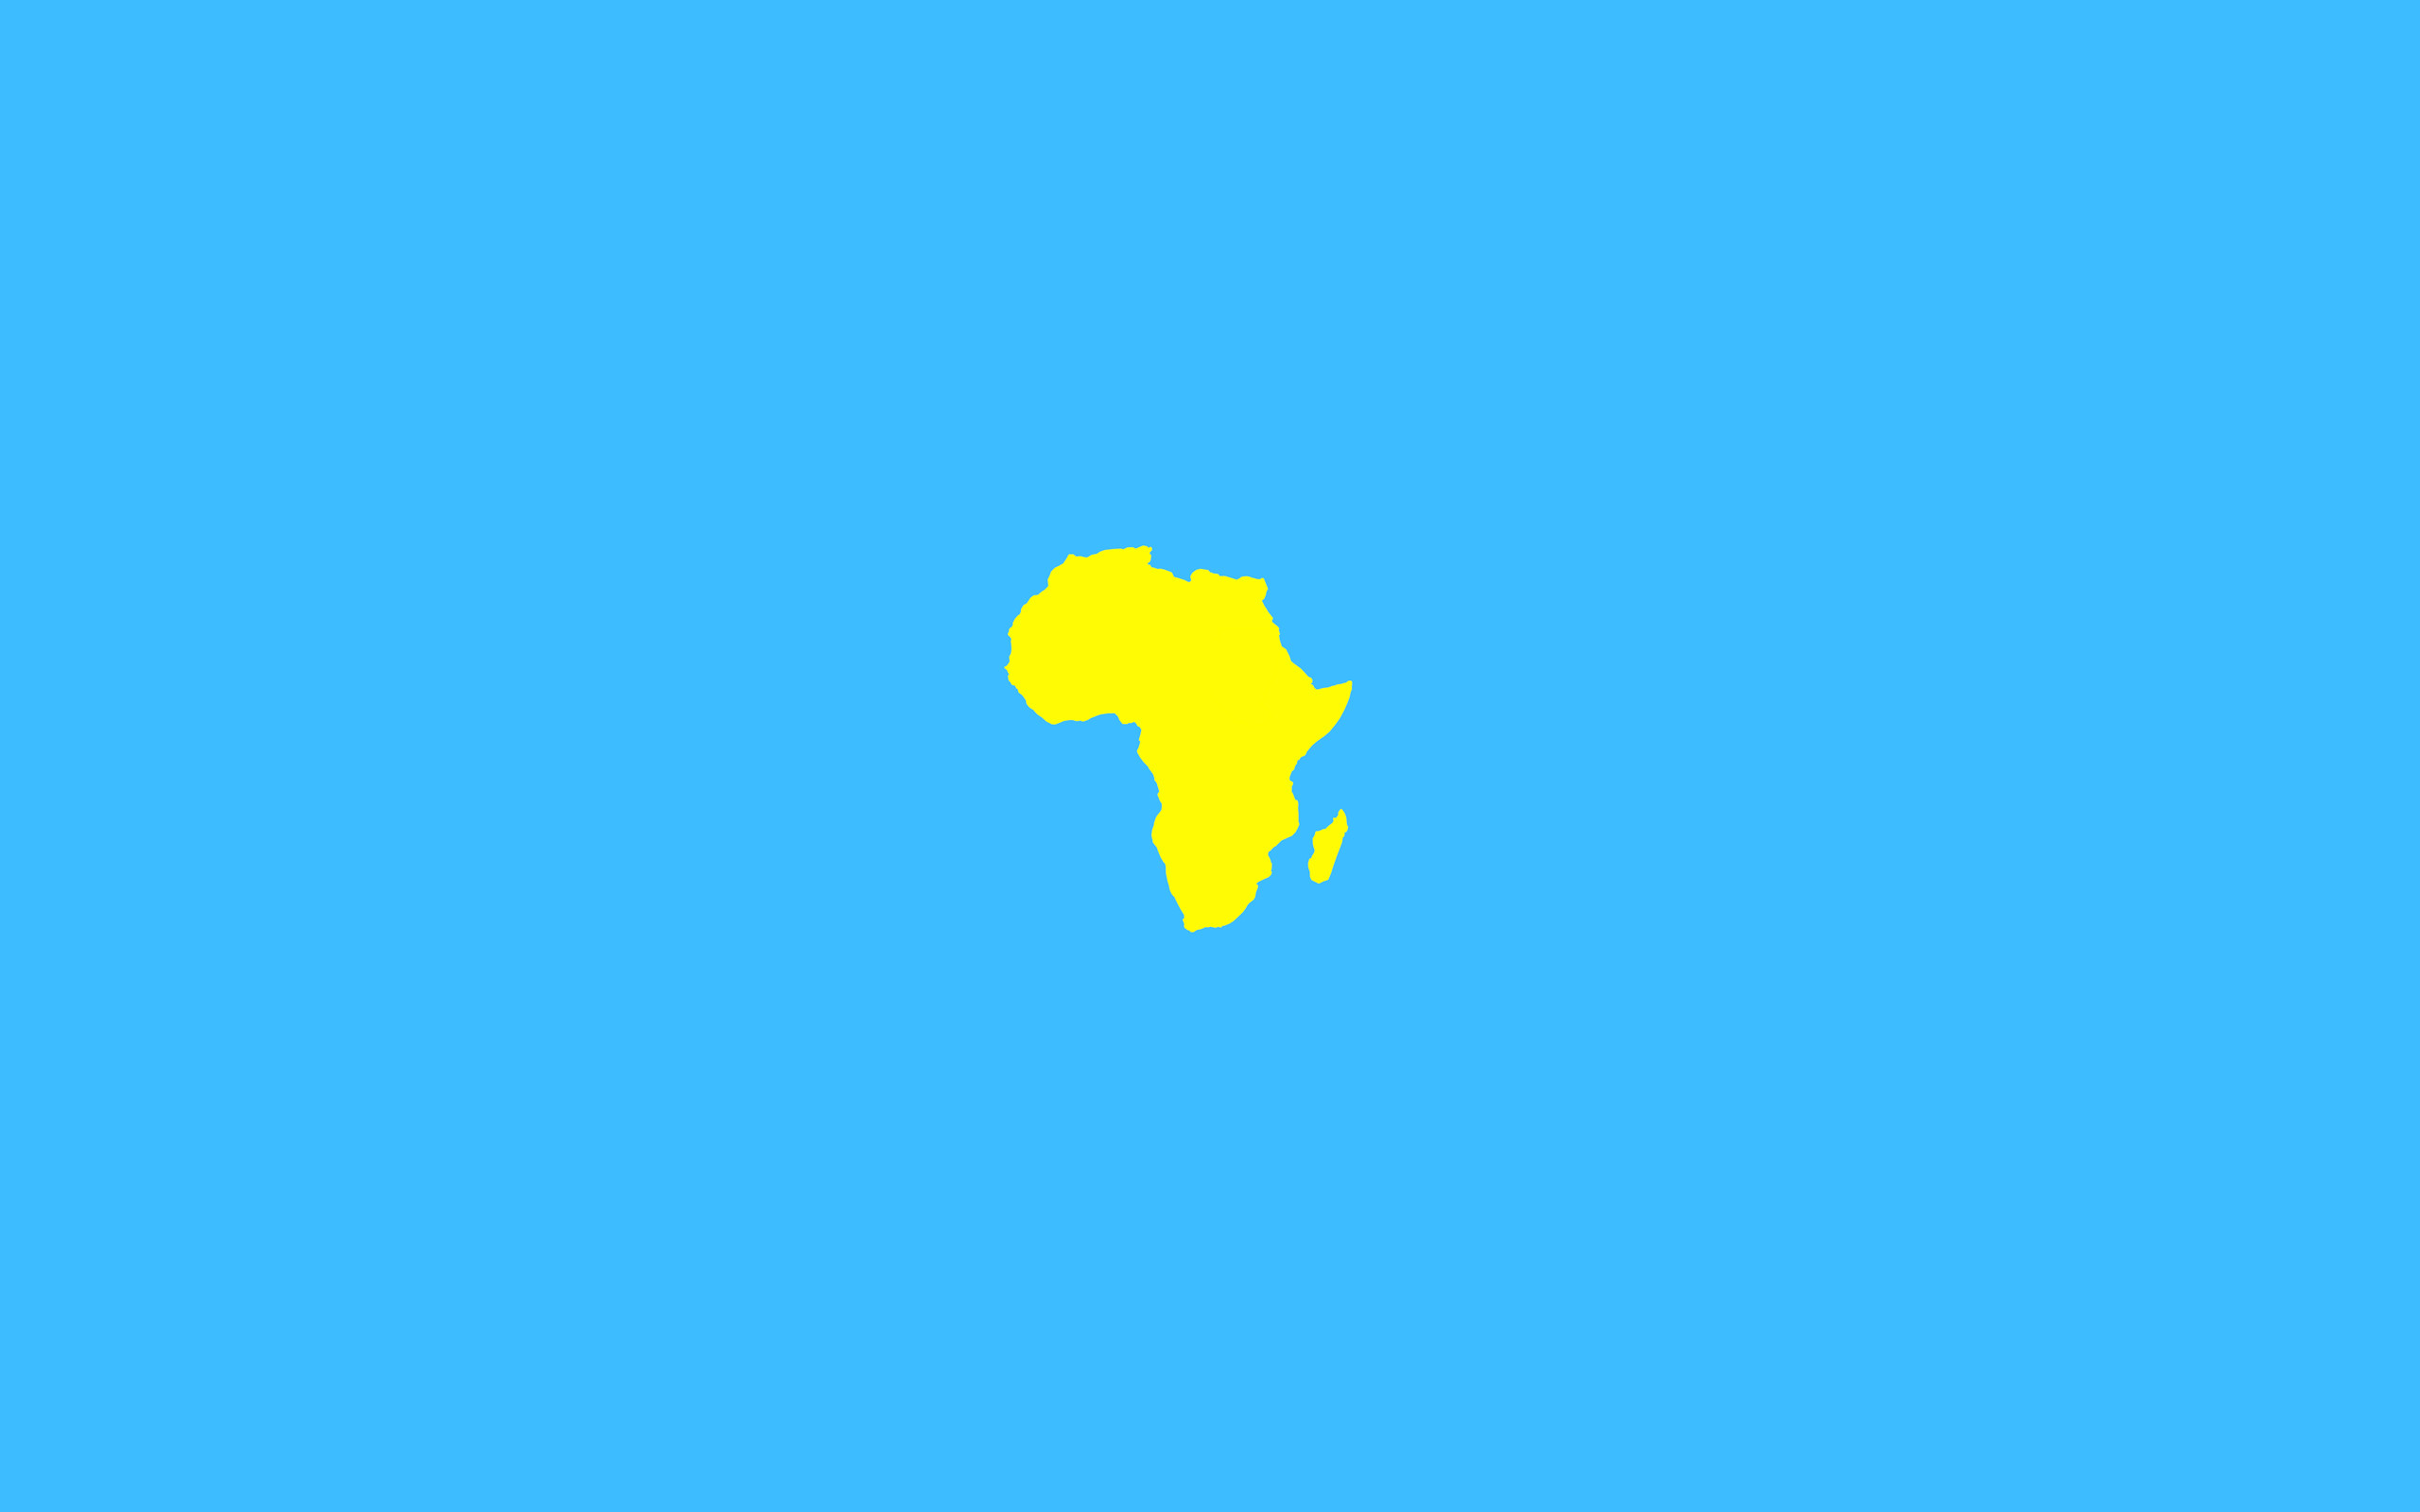 2560x1600 ... wallpapers of the African continent in different colors. Download them  by a right click and „save as“. They are all vector graphics with a  resolution of ...